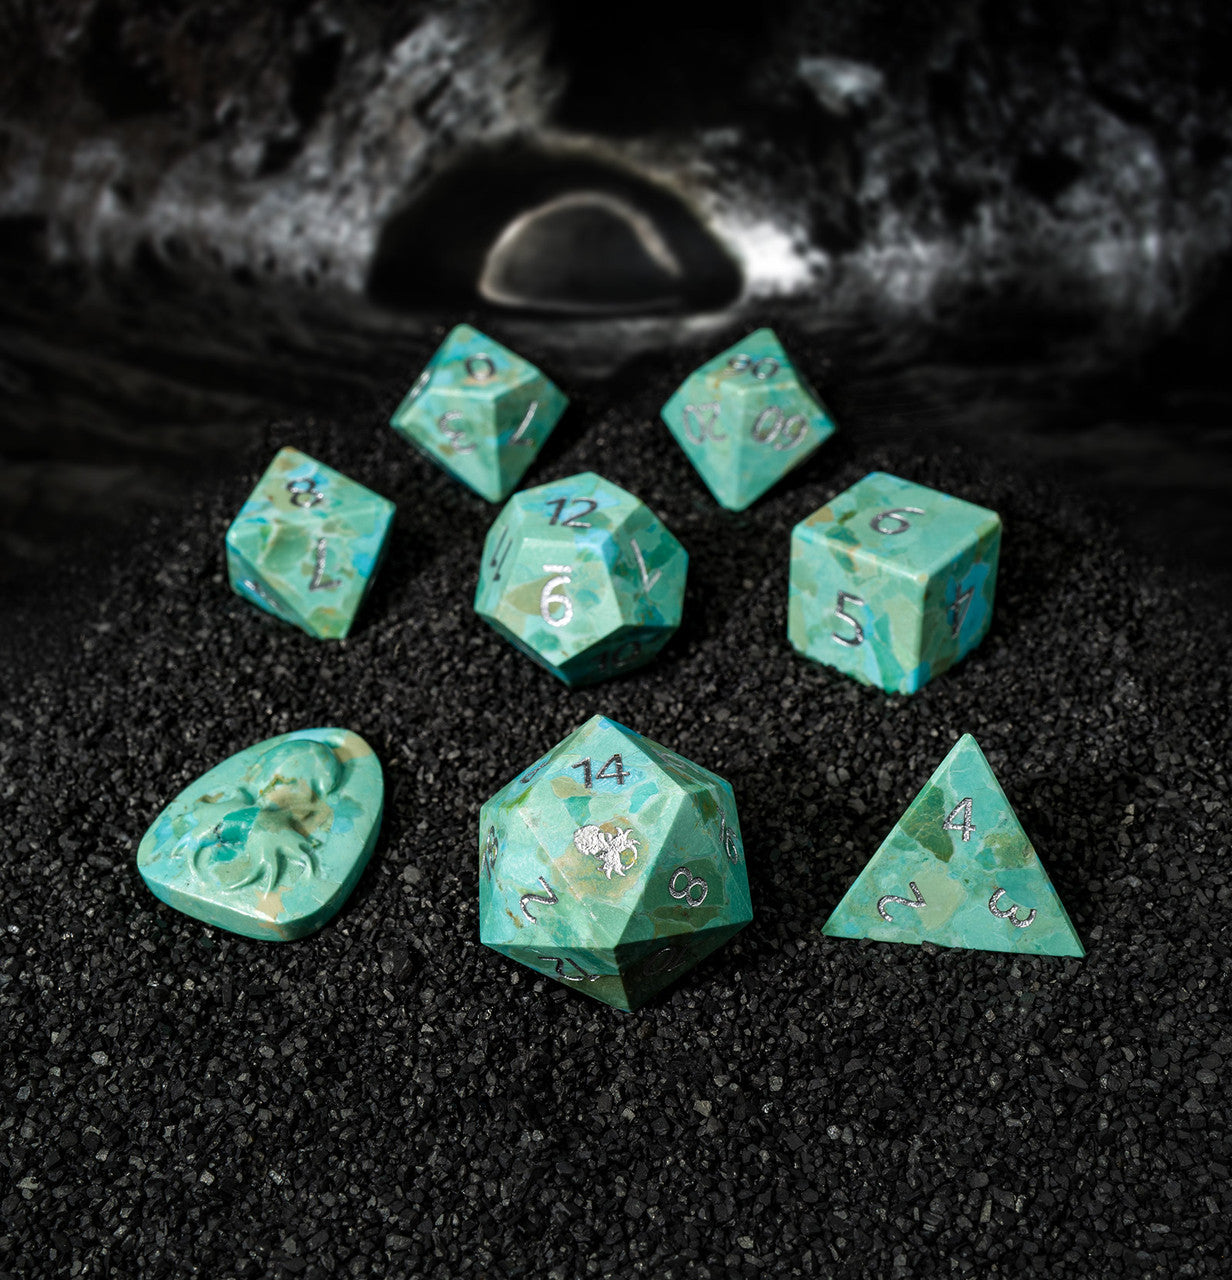 Natural Reconstituted Green Turquoise Semi-Precious 8 pc Glass Dice Set with Kraken Logo for RPGs